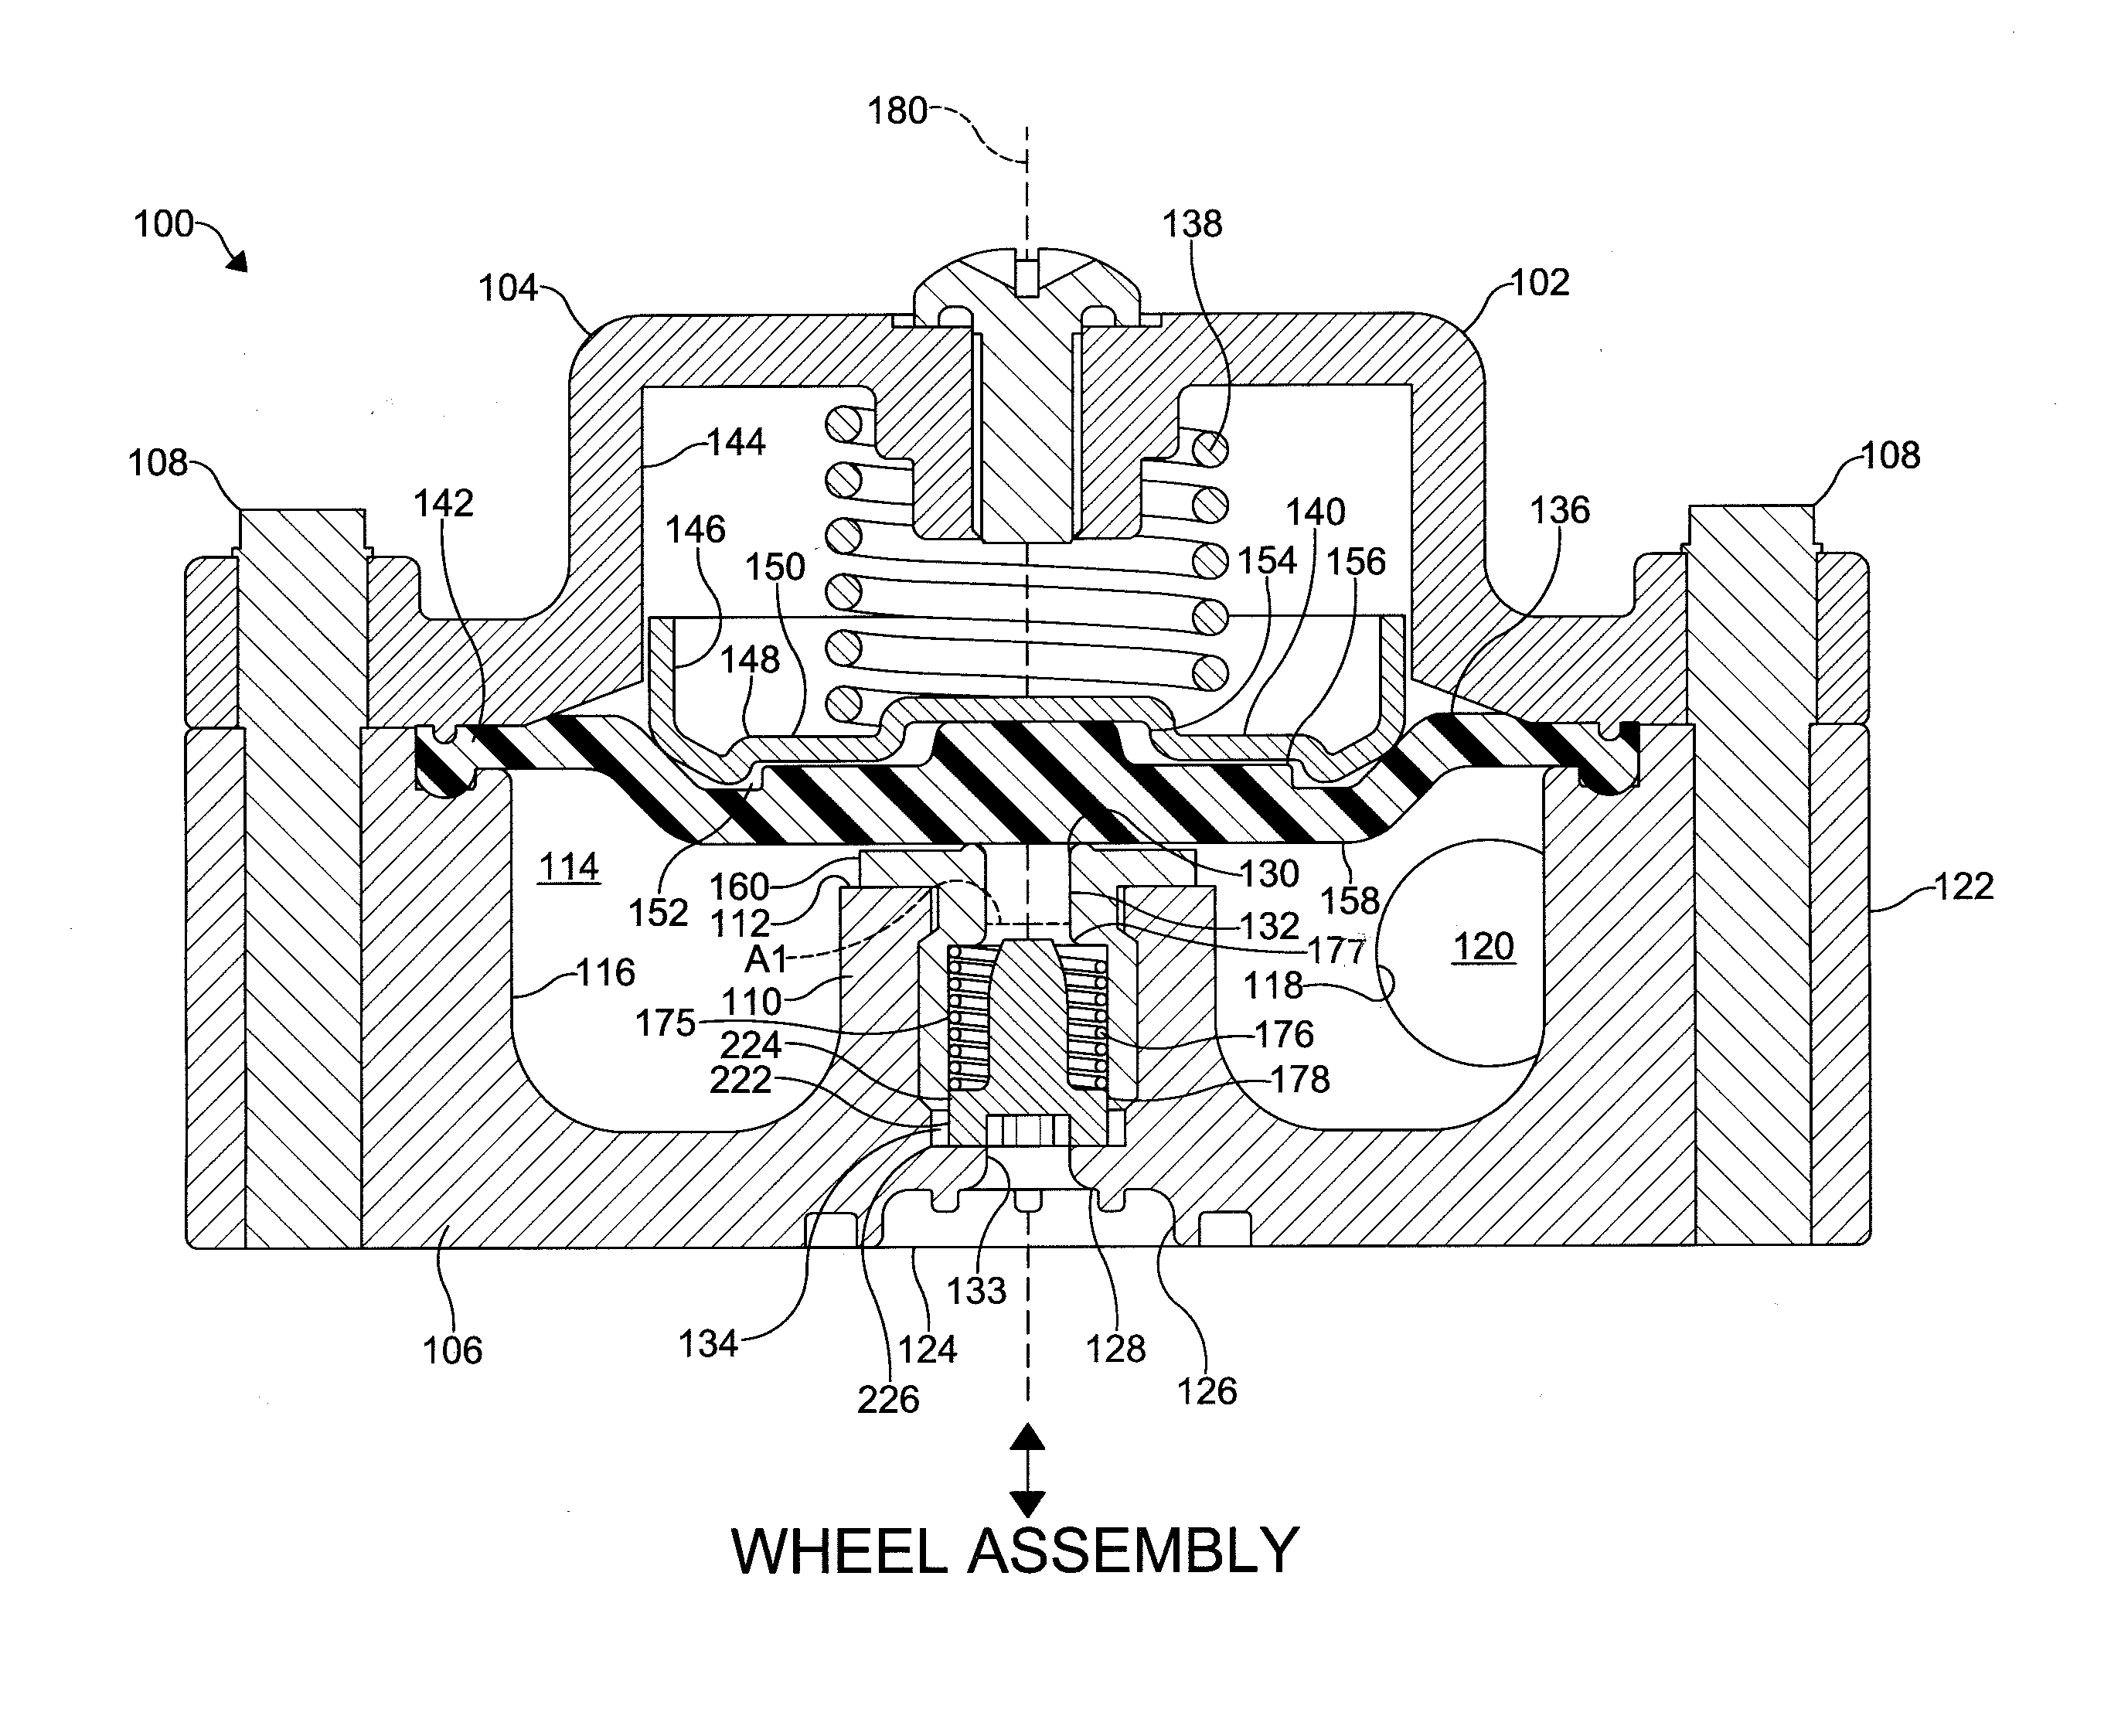 Valve assembly for a central tire inflation system